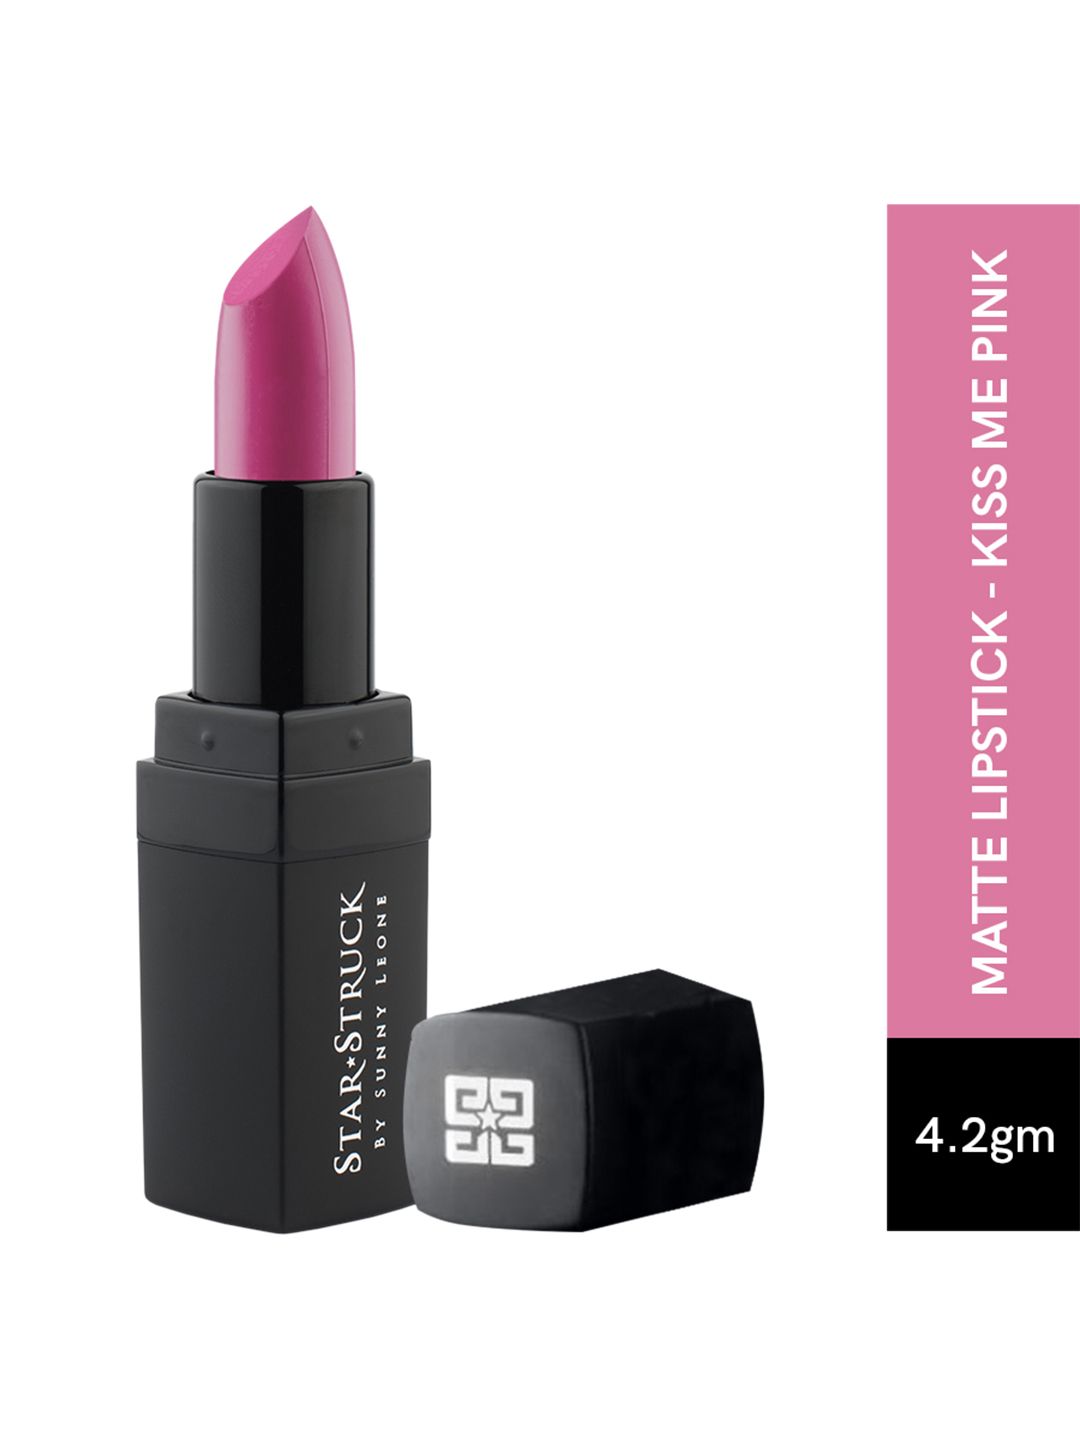 STAR STRUCK BY SUNNY LEONE Intense Long-Lasting Matte Lipstick- Kiss Me Pink Price in India